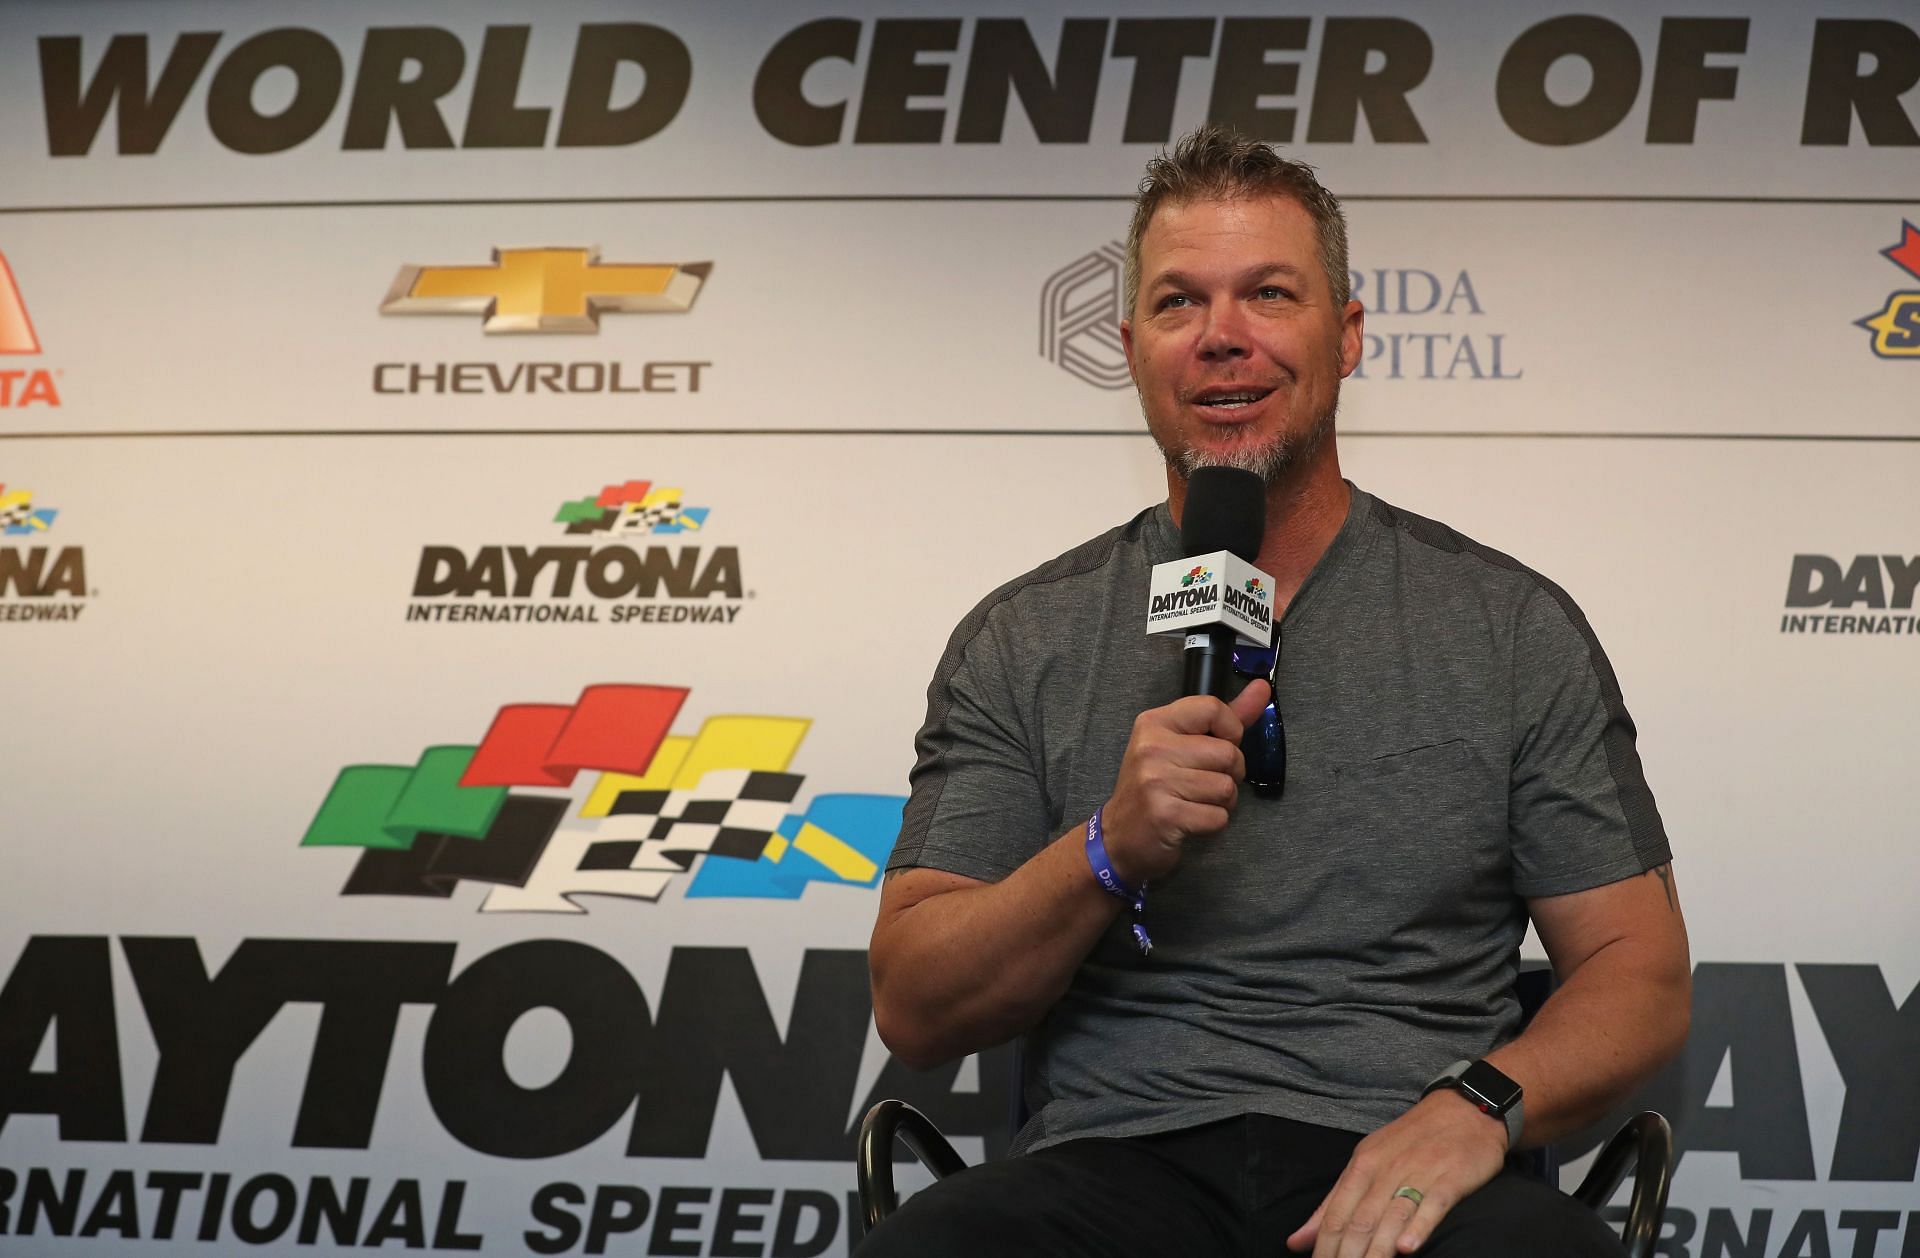 Chipper Jones downsized and sold his $11 million mansion